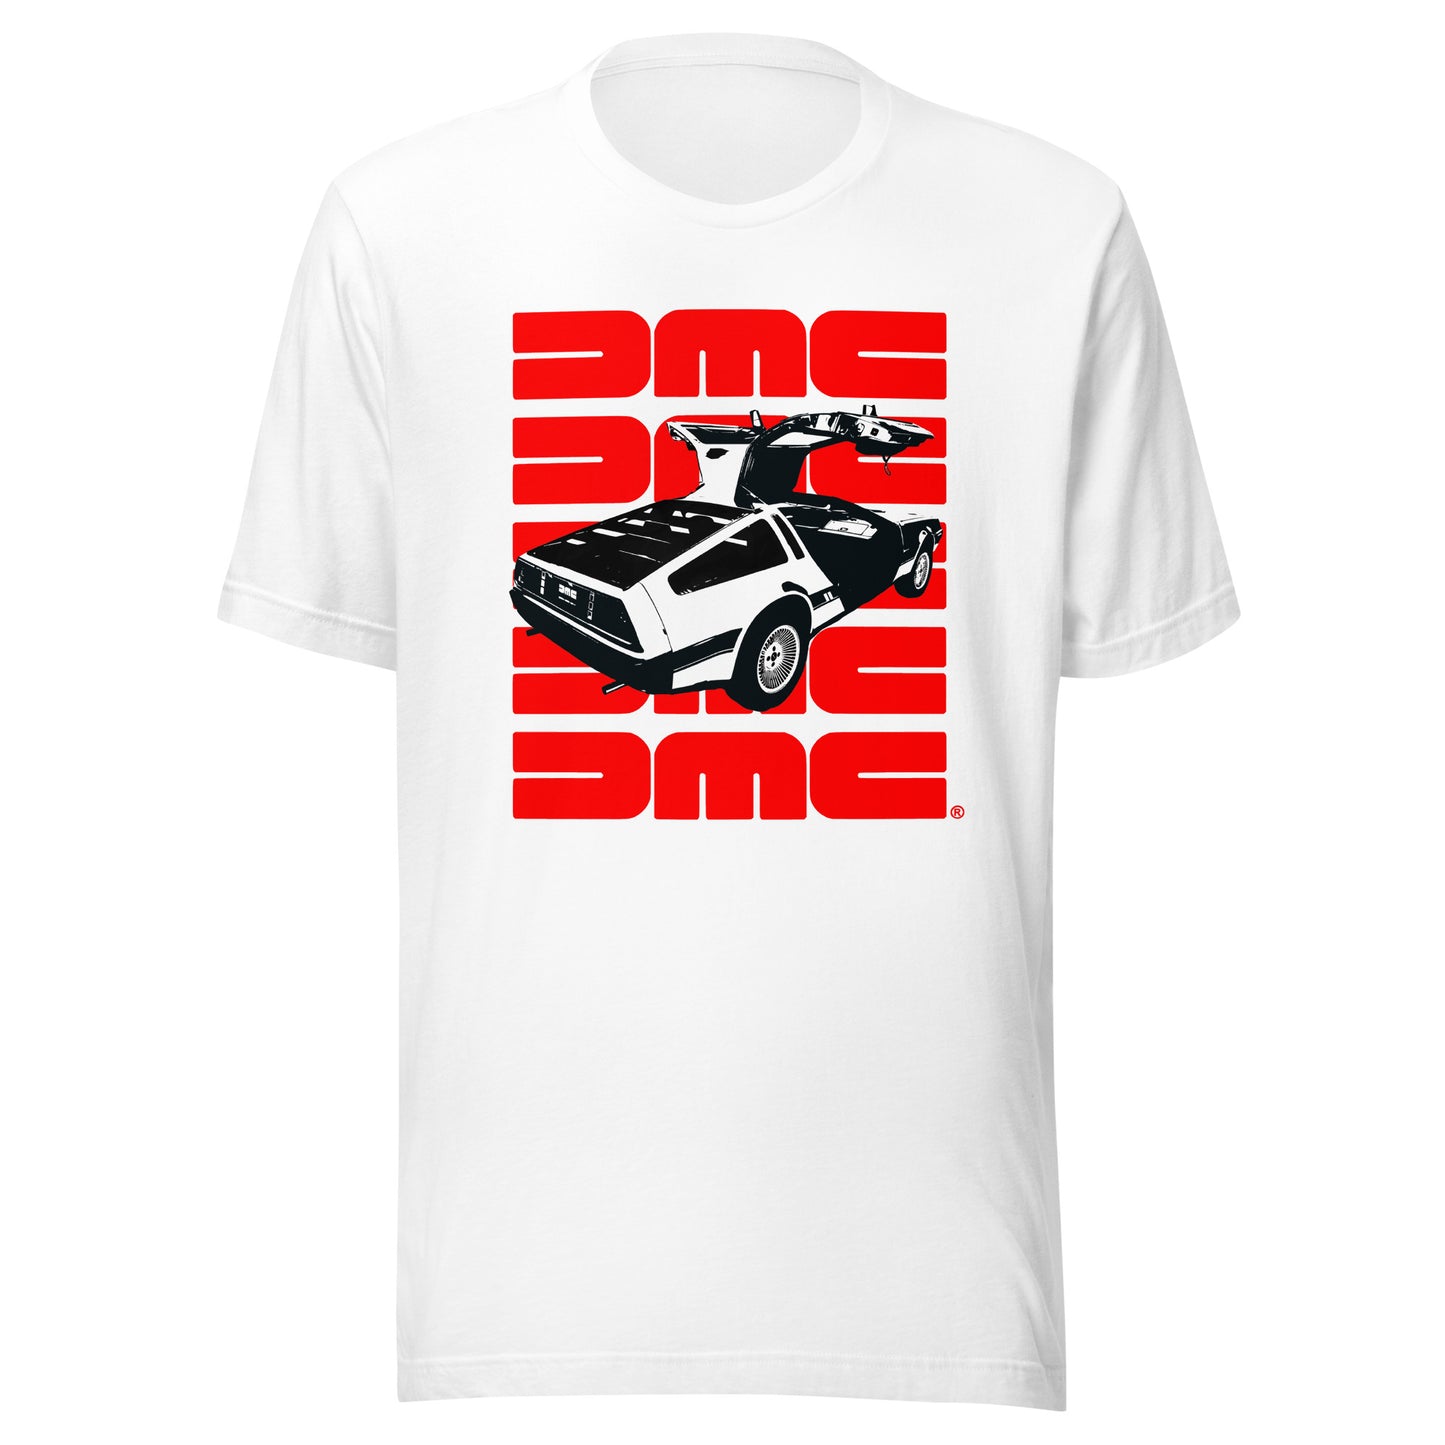 Black, White, and Red All Over Unisex t-shirt